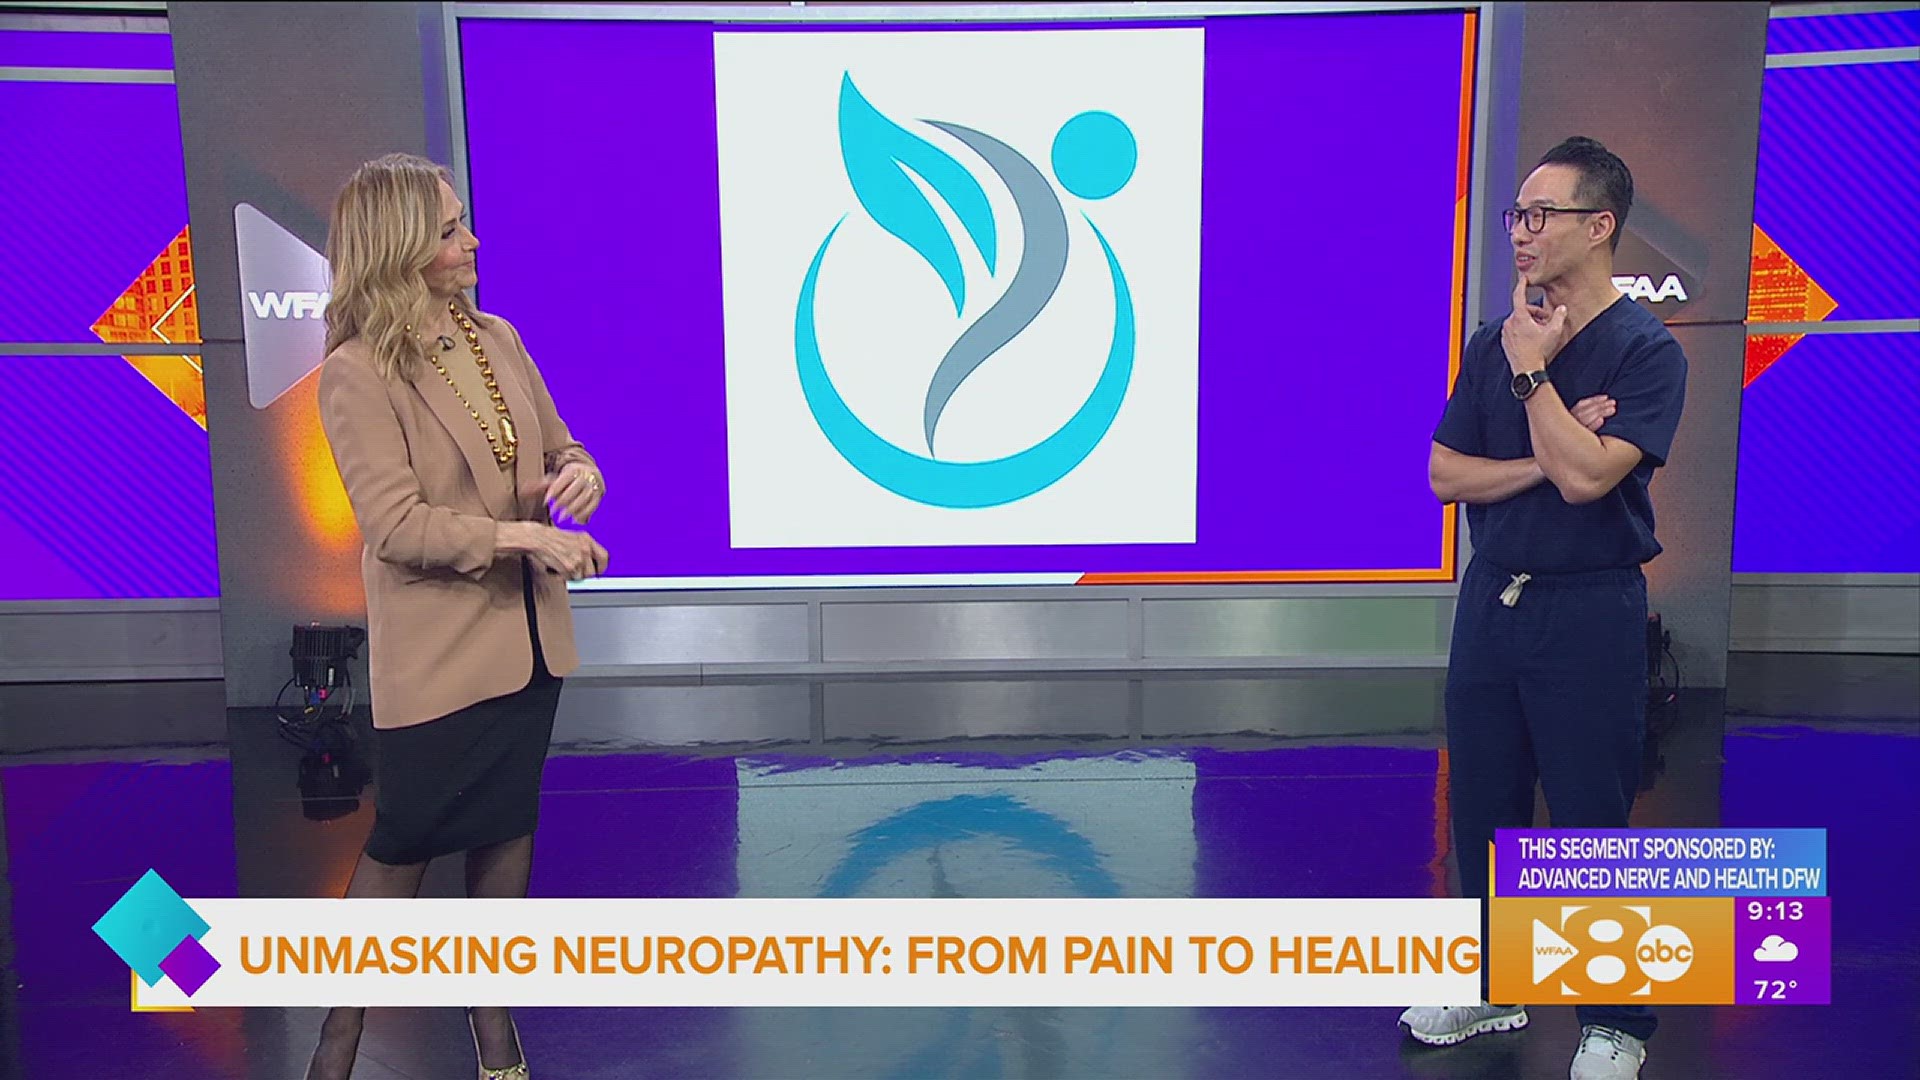 This segment is sponsored by Advanced Nerve & Health DFW. Call 469.557.2427 or go to neuropathyrescue.com for more information.